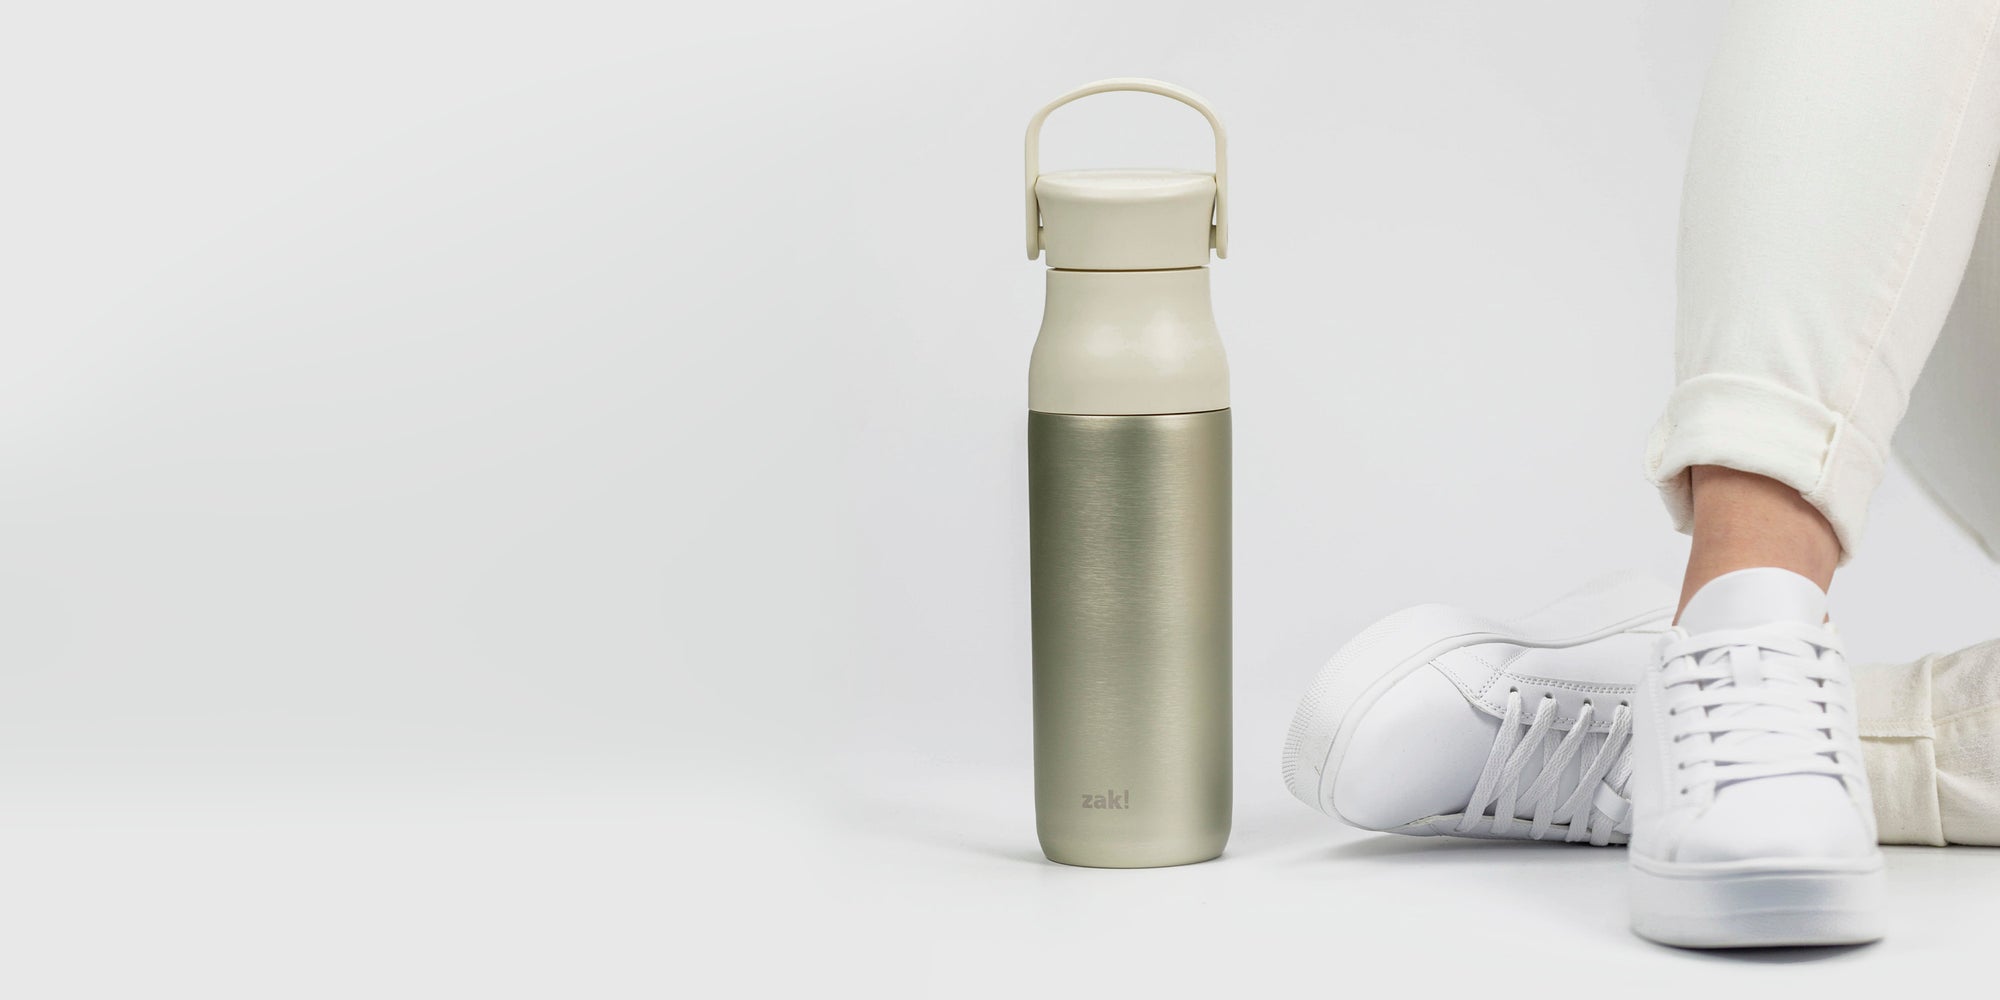 Stainless Steel Water Bottles: Being Green Now Has Color Options